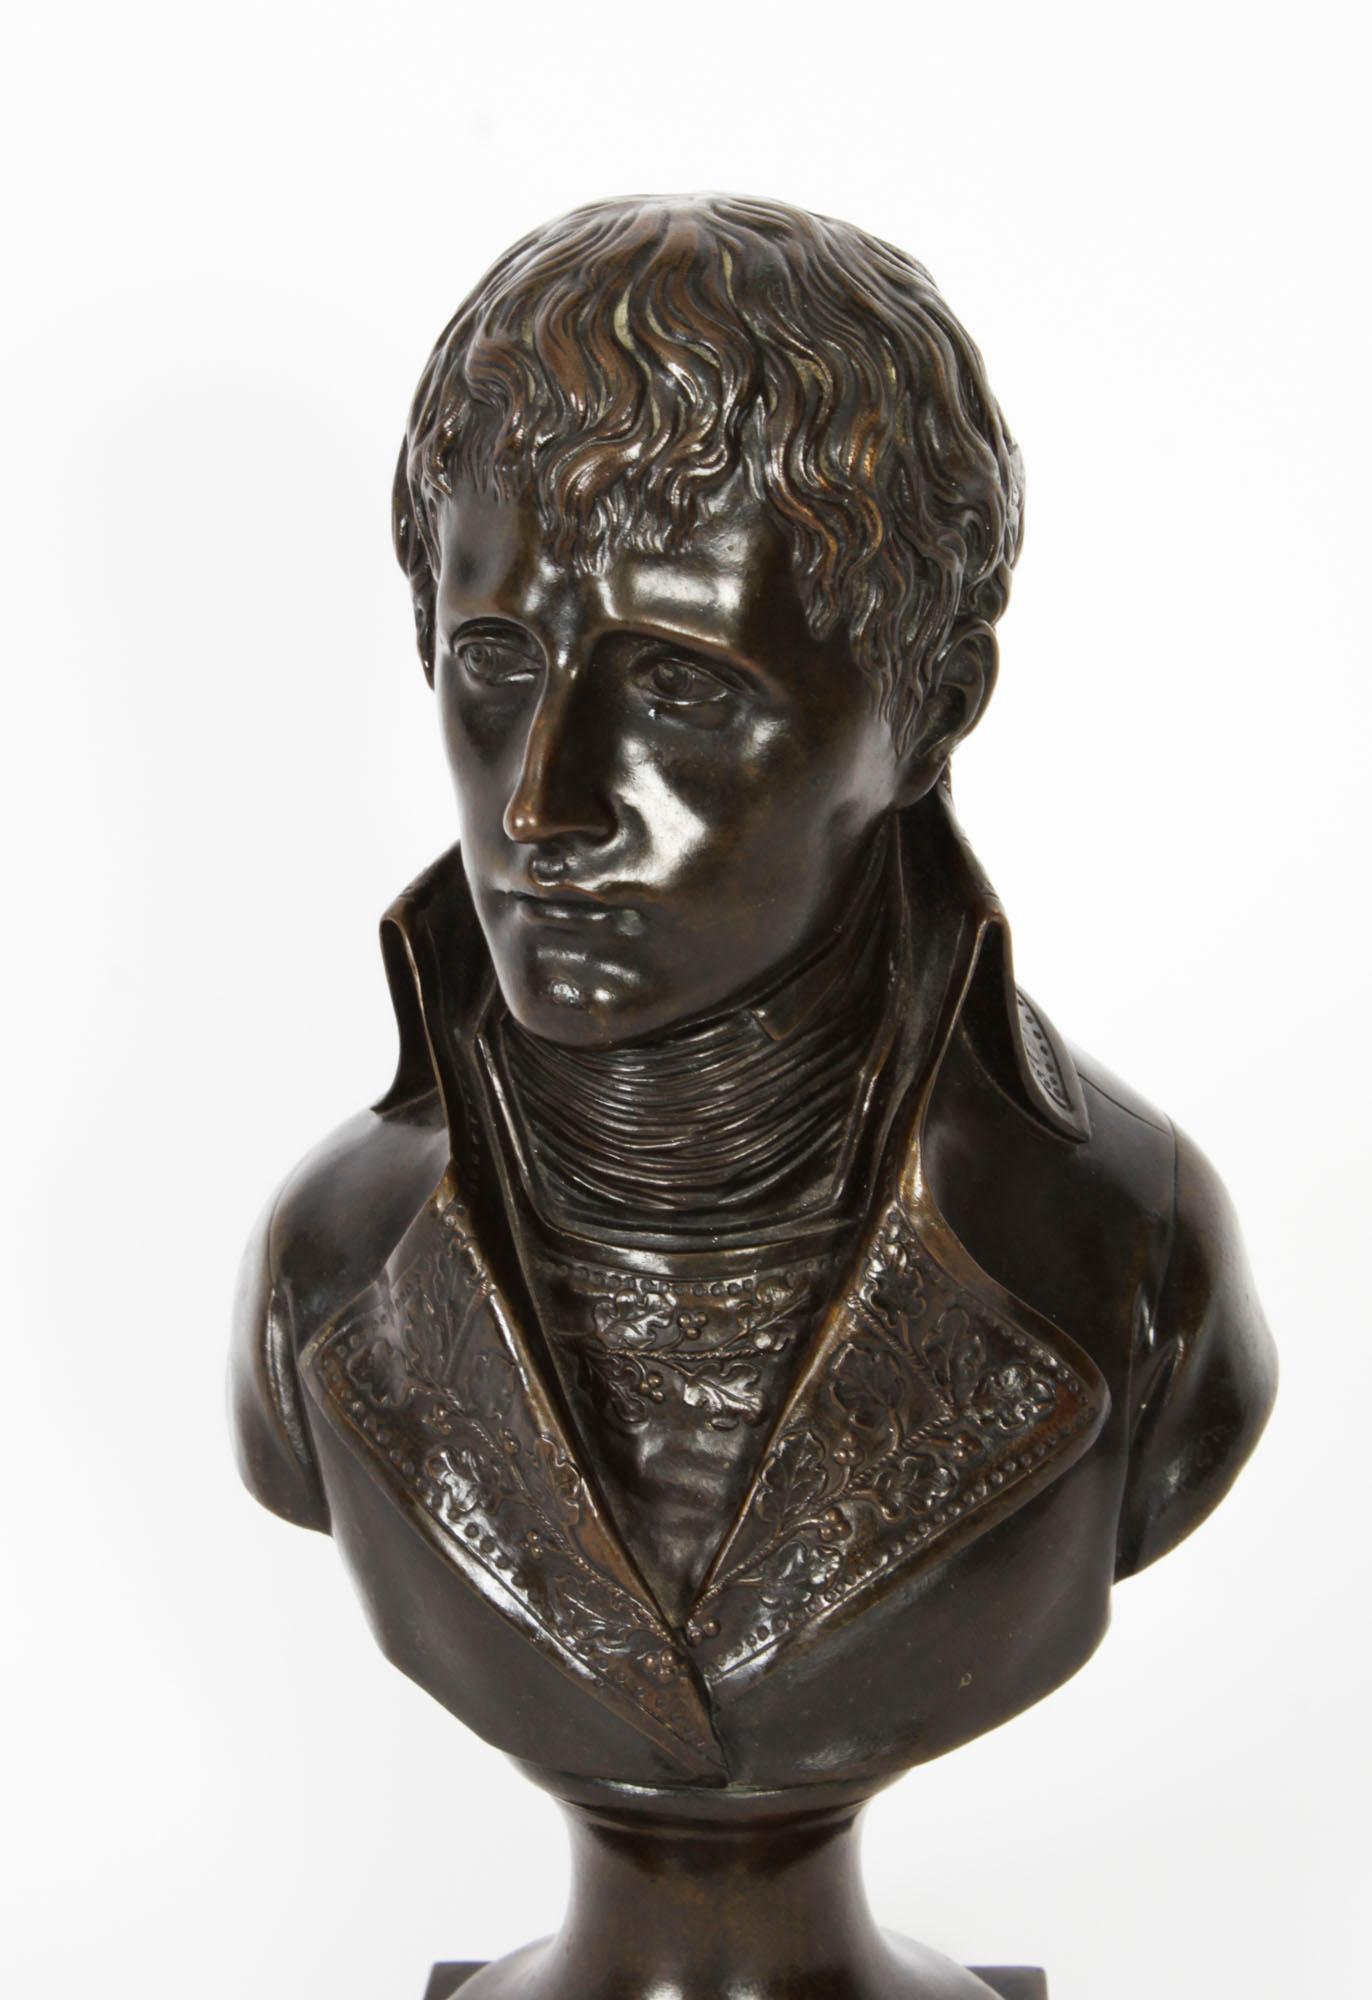 This is an impressive bronze sculpture of Napoleon Bonaparte as  First Consul, Mid 19th century in date.

The exquisite black patina bust features Napoleon in First Consul uniform, mounted on a beautiful socle base.

Napoleon reigned as First Consul